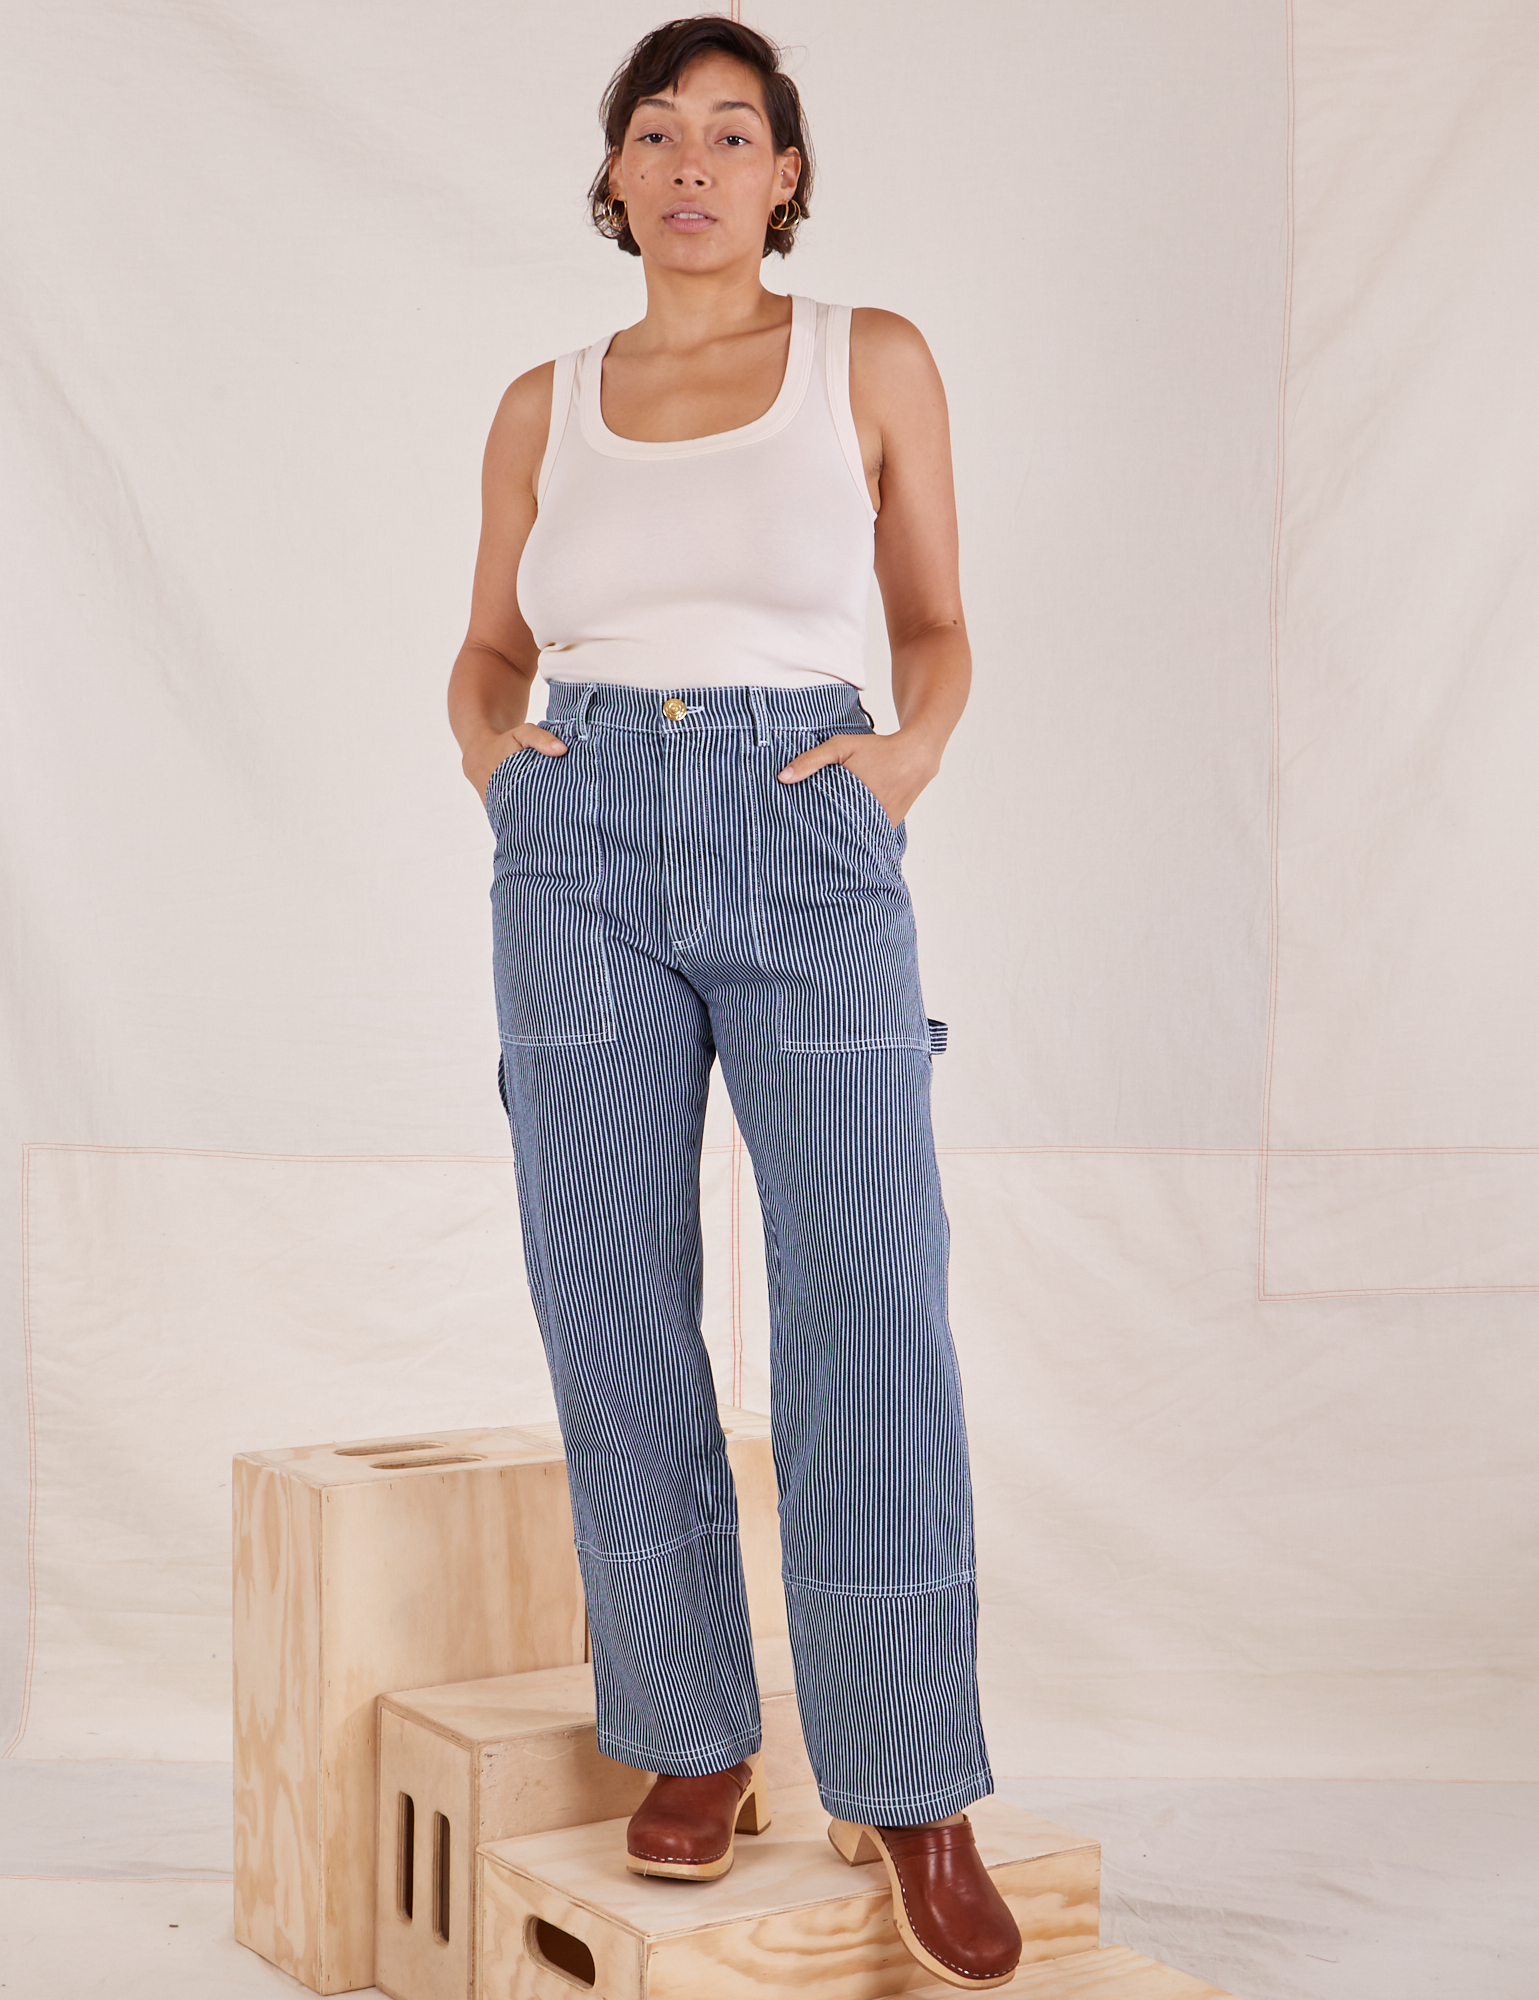 Tiara is 5&#39;4&quot; and wearing S Carpenter Jeans in Railroad Stripes paired with a vintage off-white Tank Top